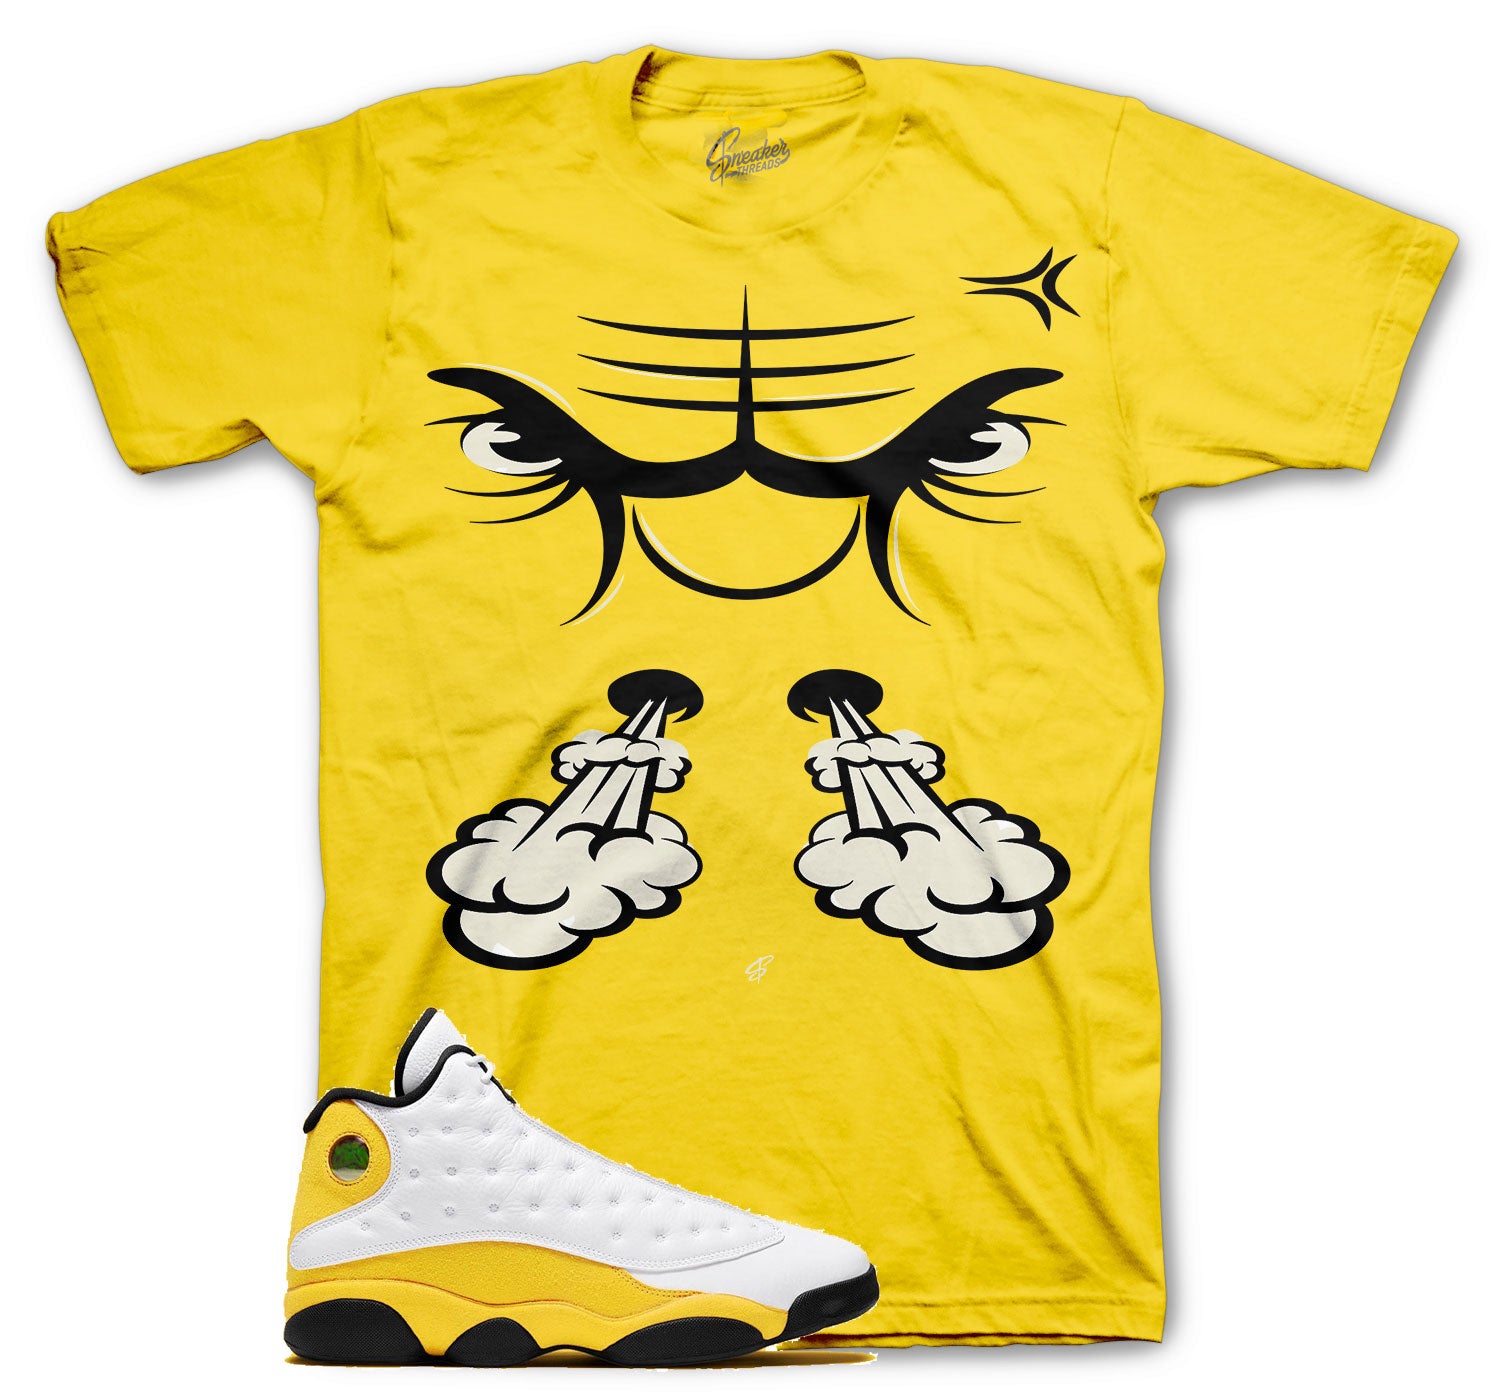 Jordan 13 del sol sneaker tees and matching yellow outfits for AJ13